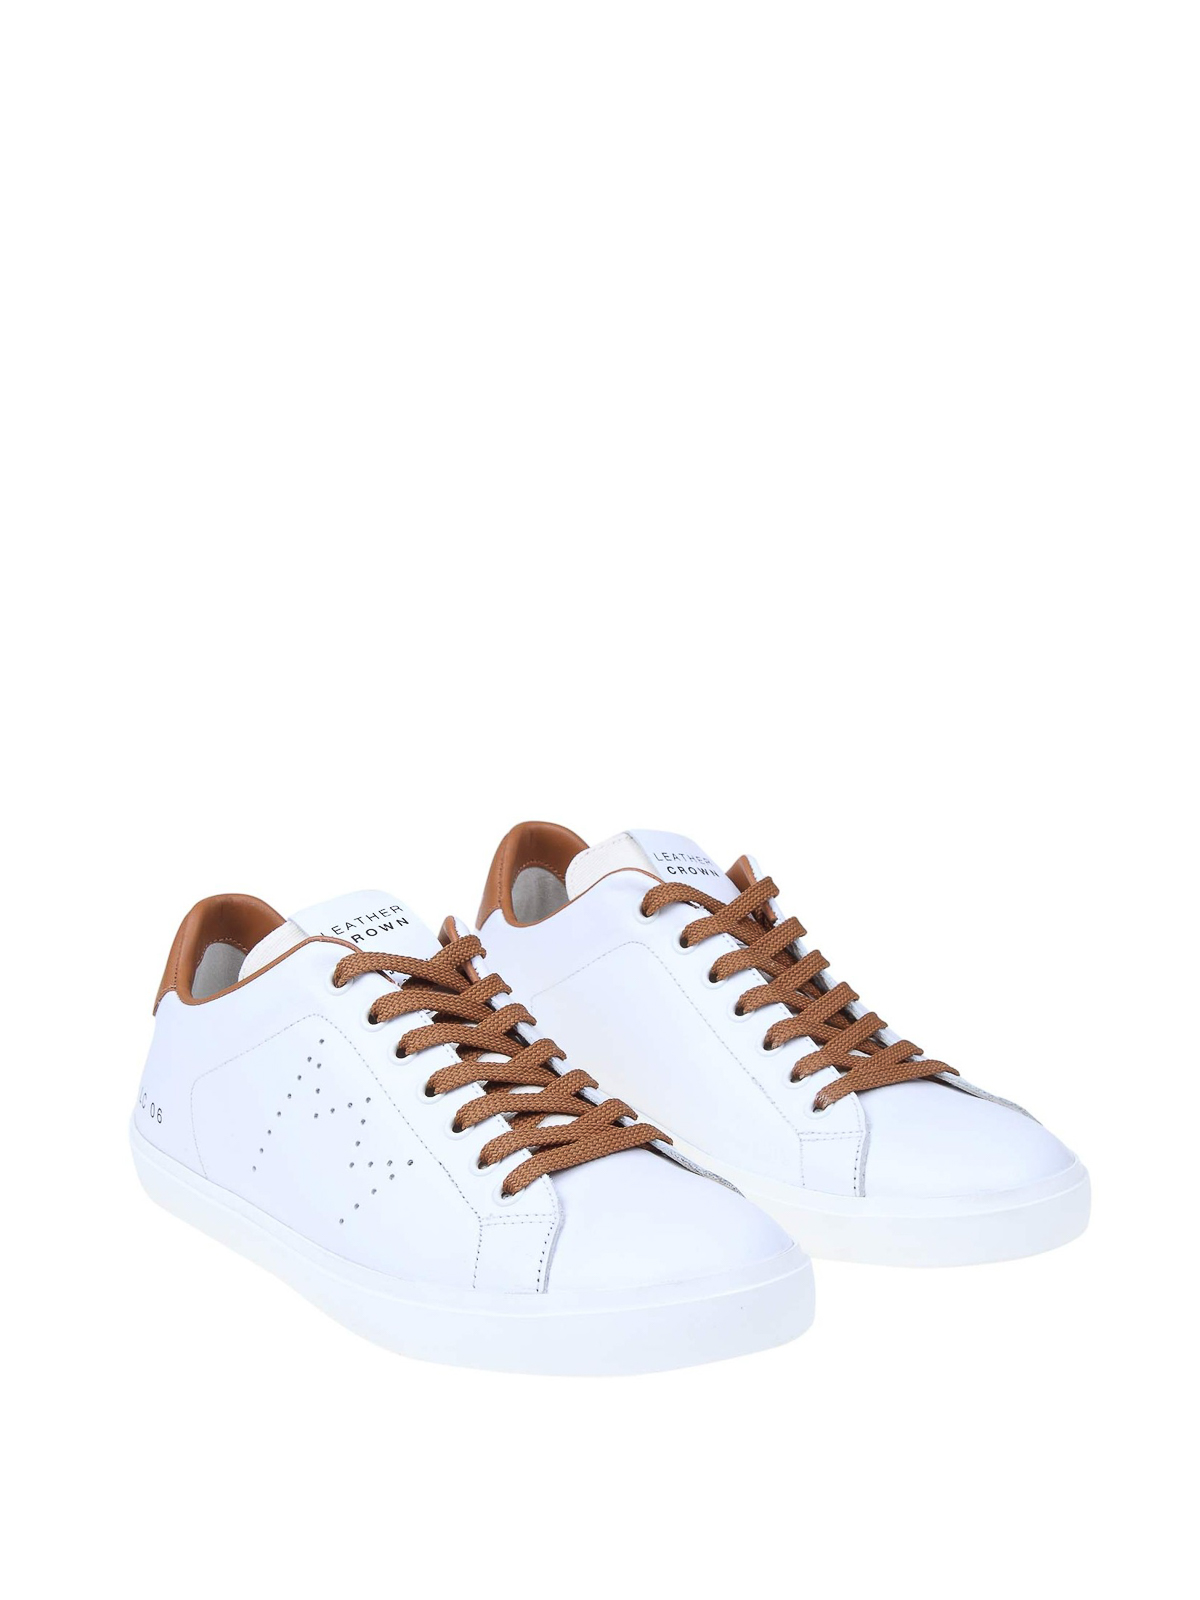 LEATHER CROWN Sneakers for Men | ModeSens